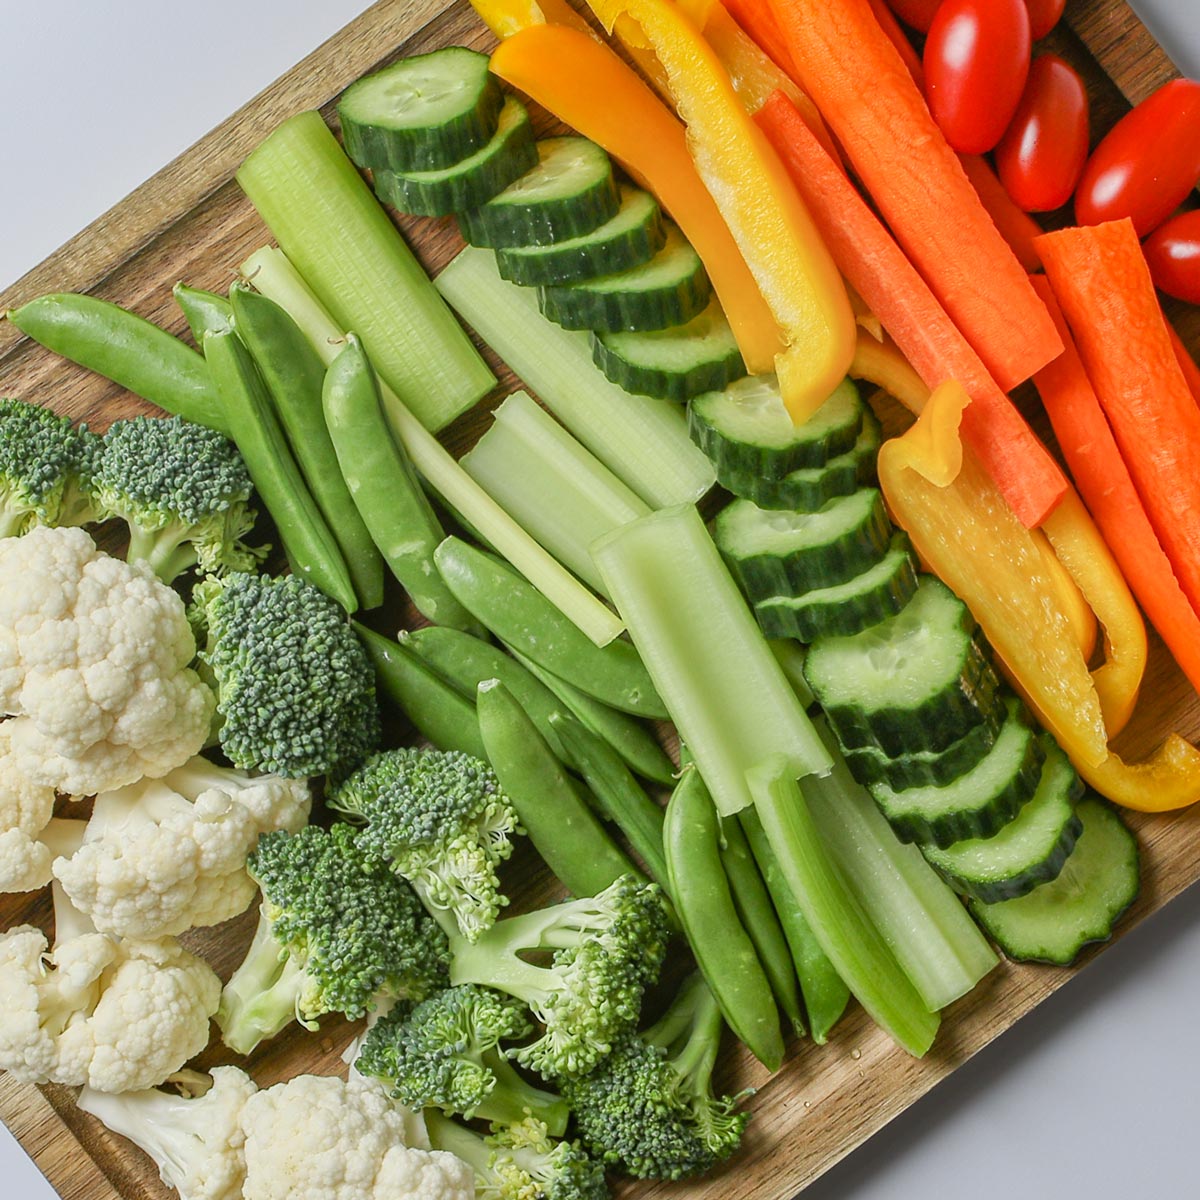 How to Cut Vegetables in a Prettier, More Efficient Way